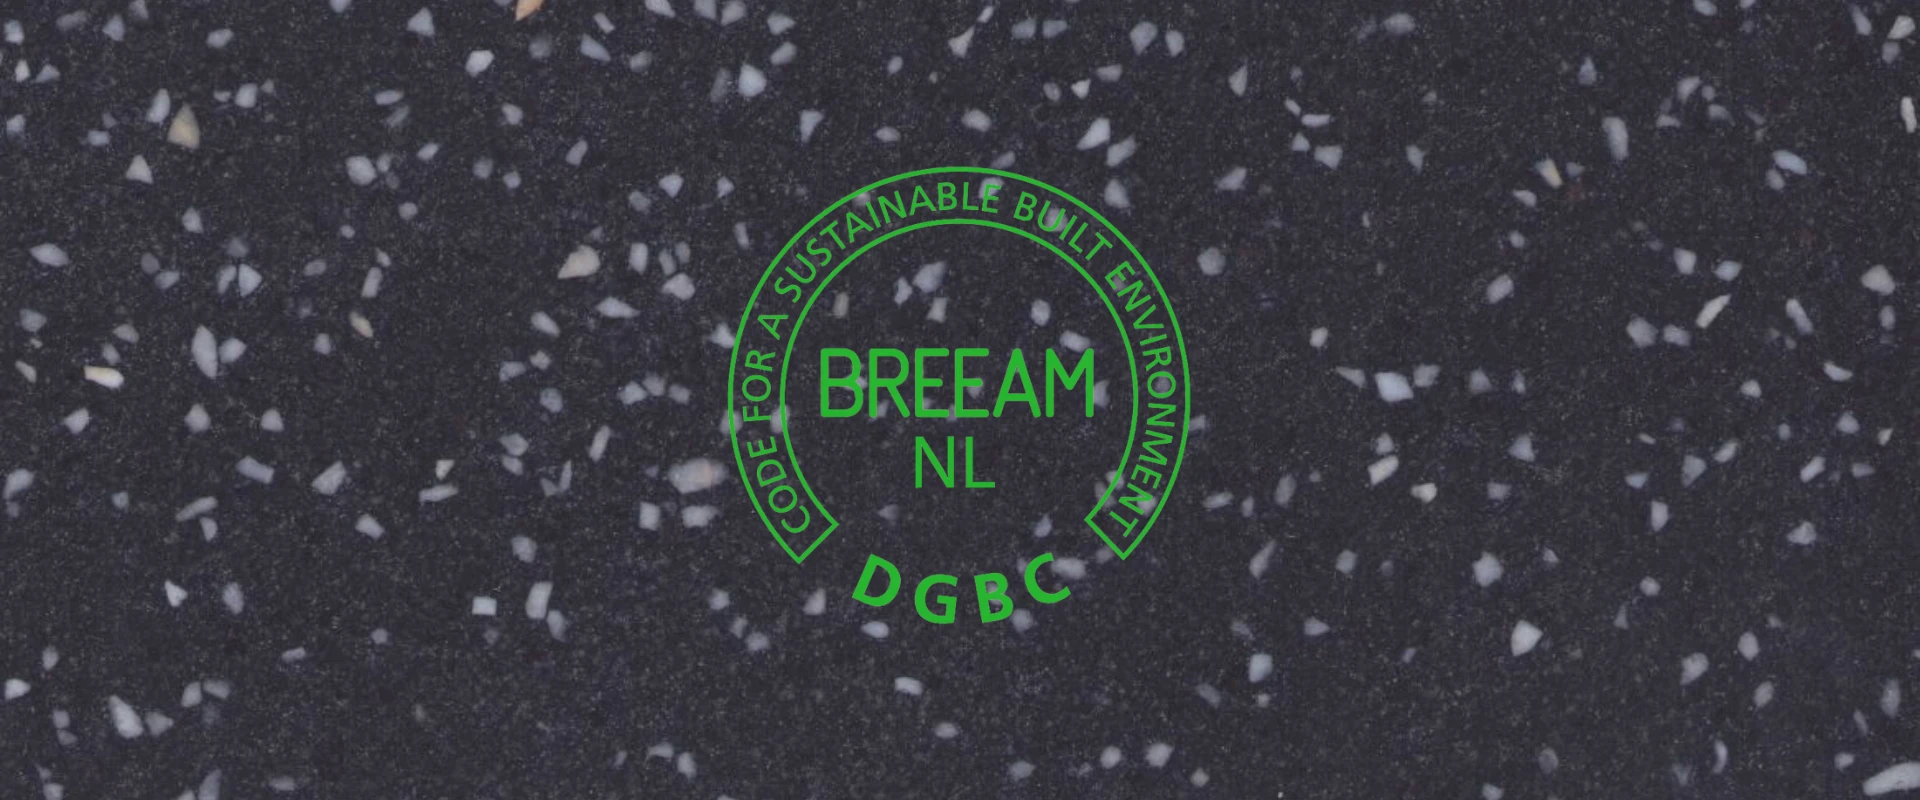 Everything you need to know about BREEAM certification